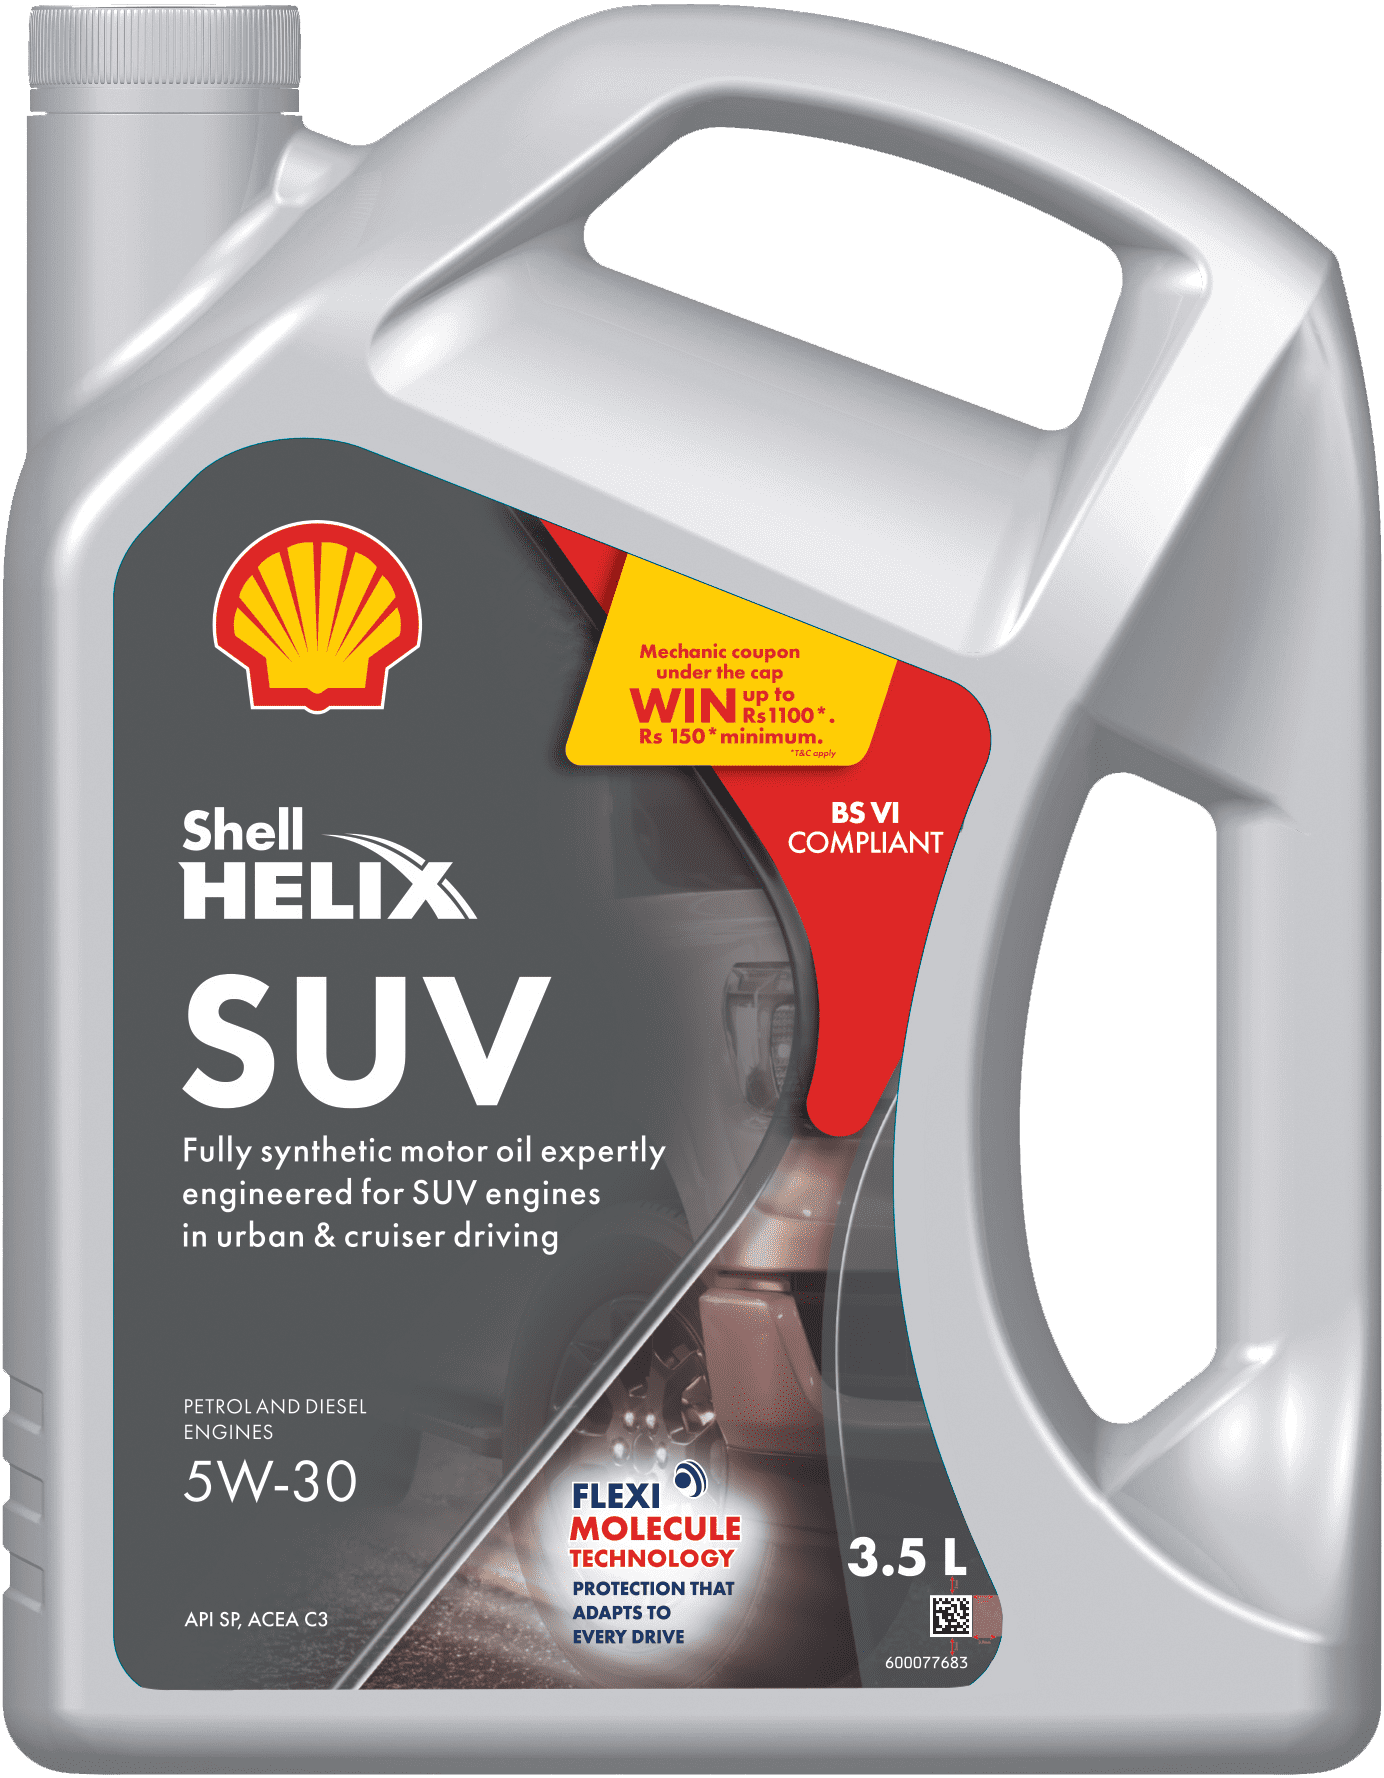 Shell launches a new range of synthetic 5W-30 oils for passenger cars offering unbeatable protection and longer engine life